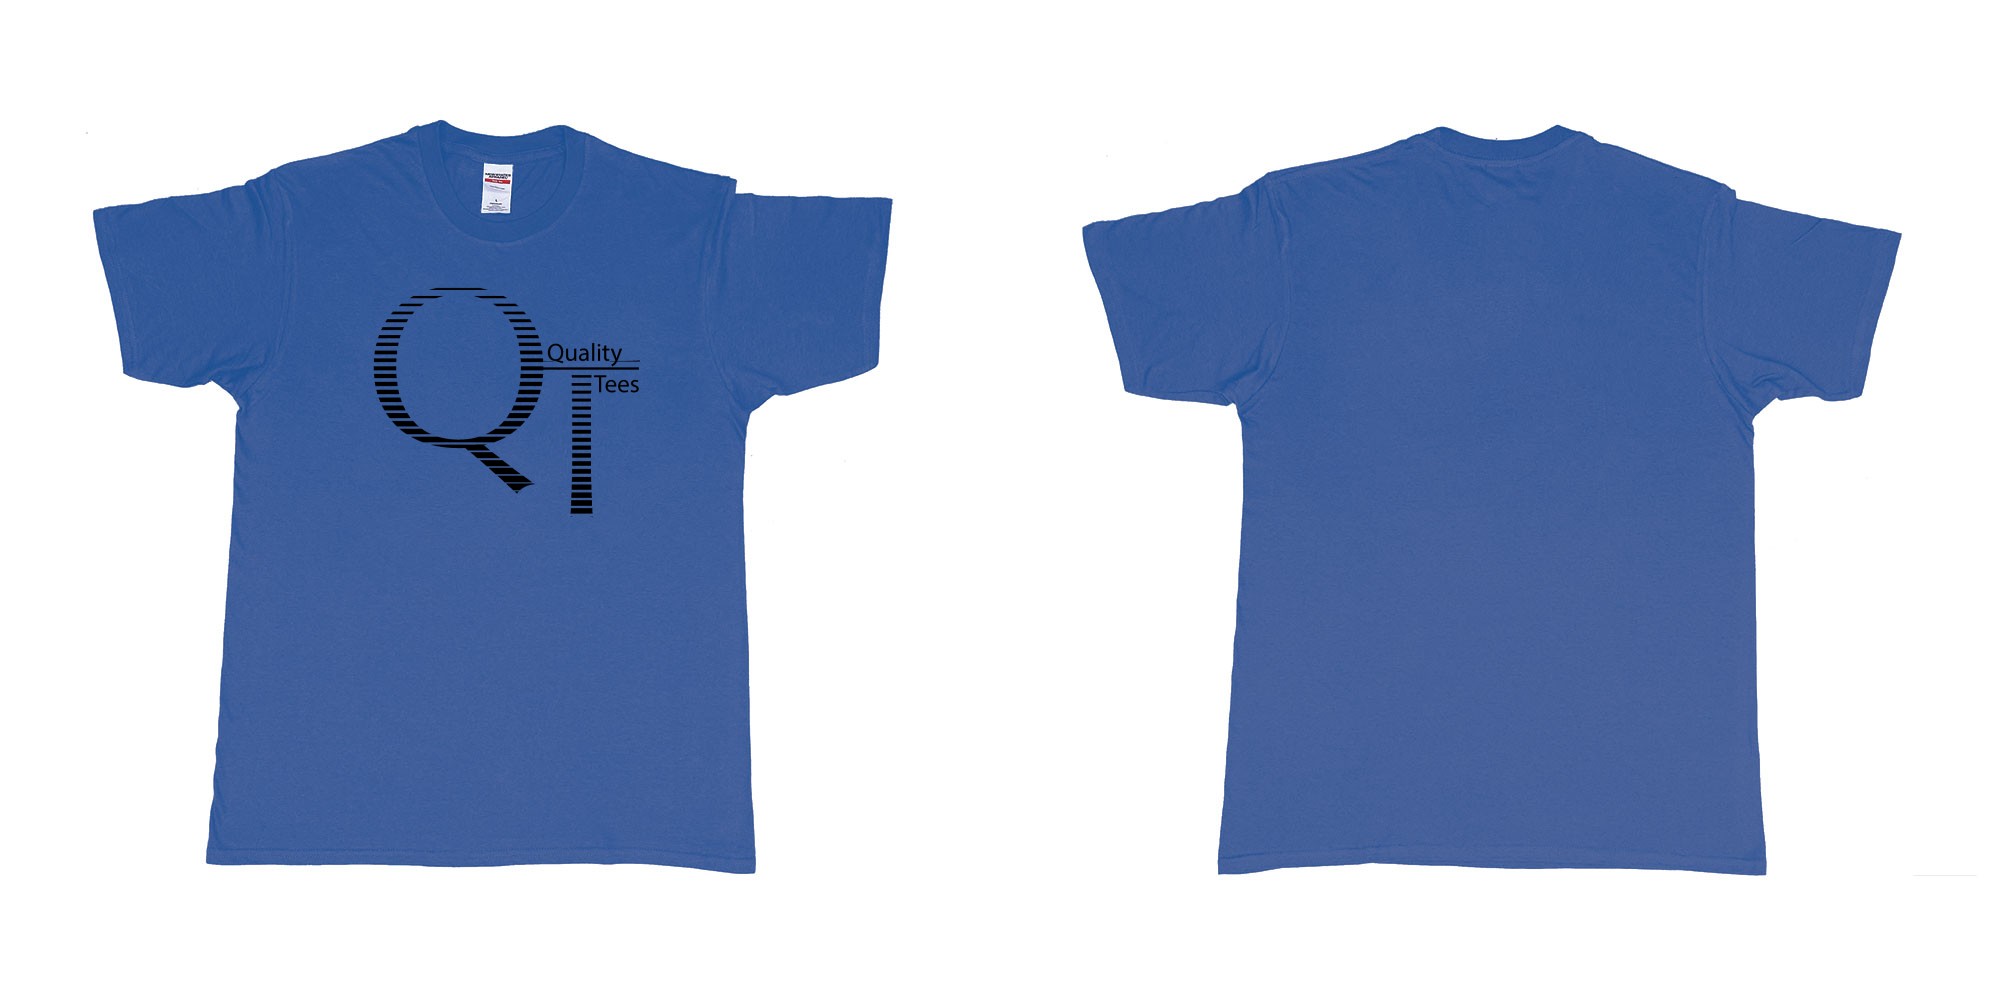 Custom tshirt design quality teeshirts in fabric color royal-blue choice your own text made in Bali by The Pirate Way